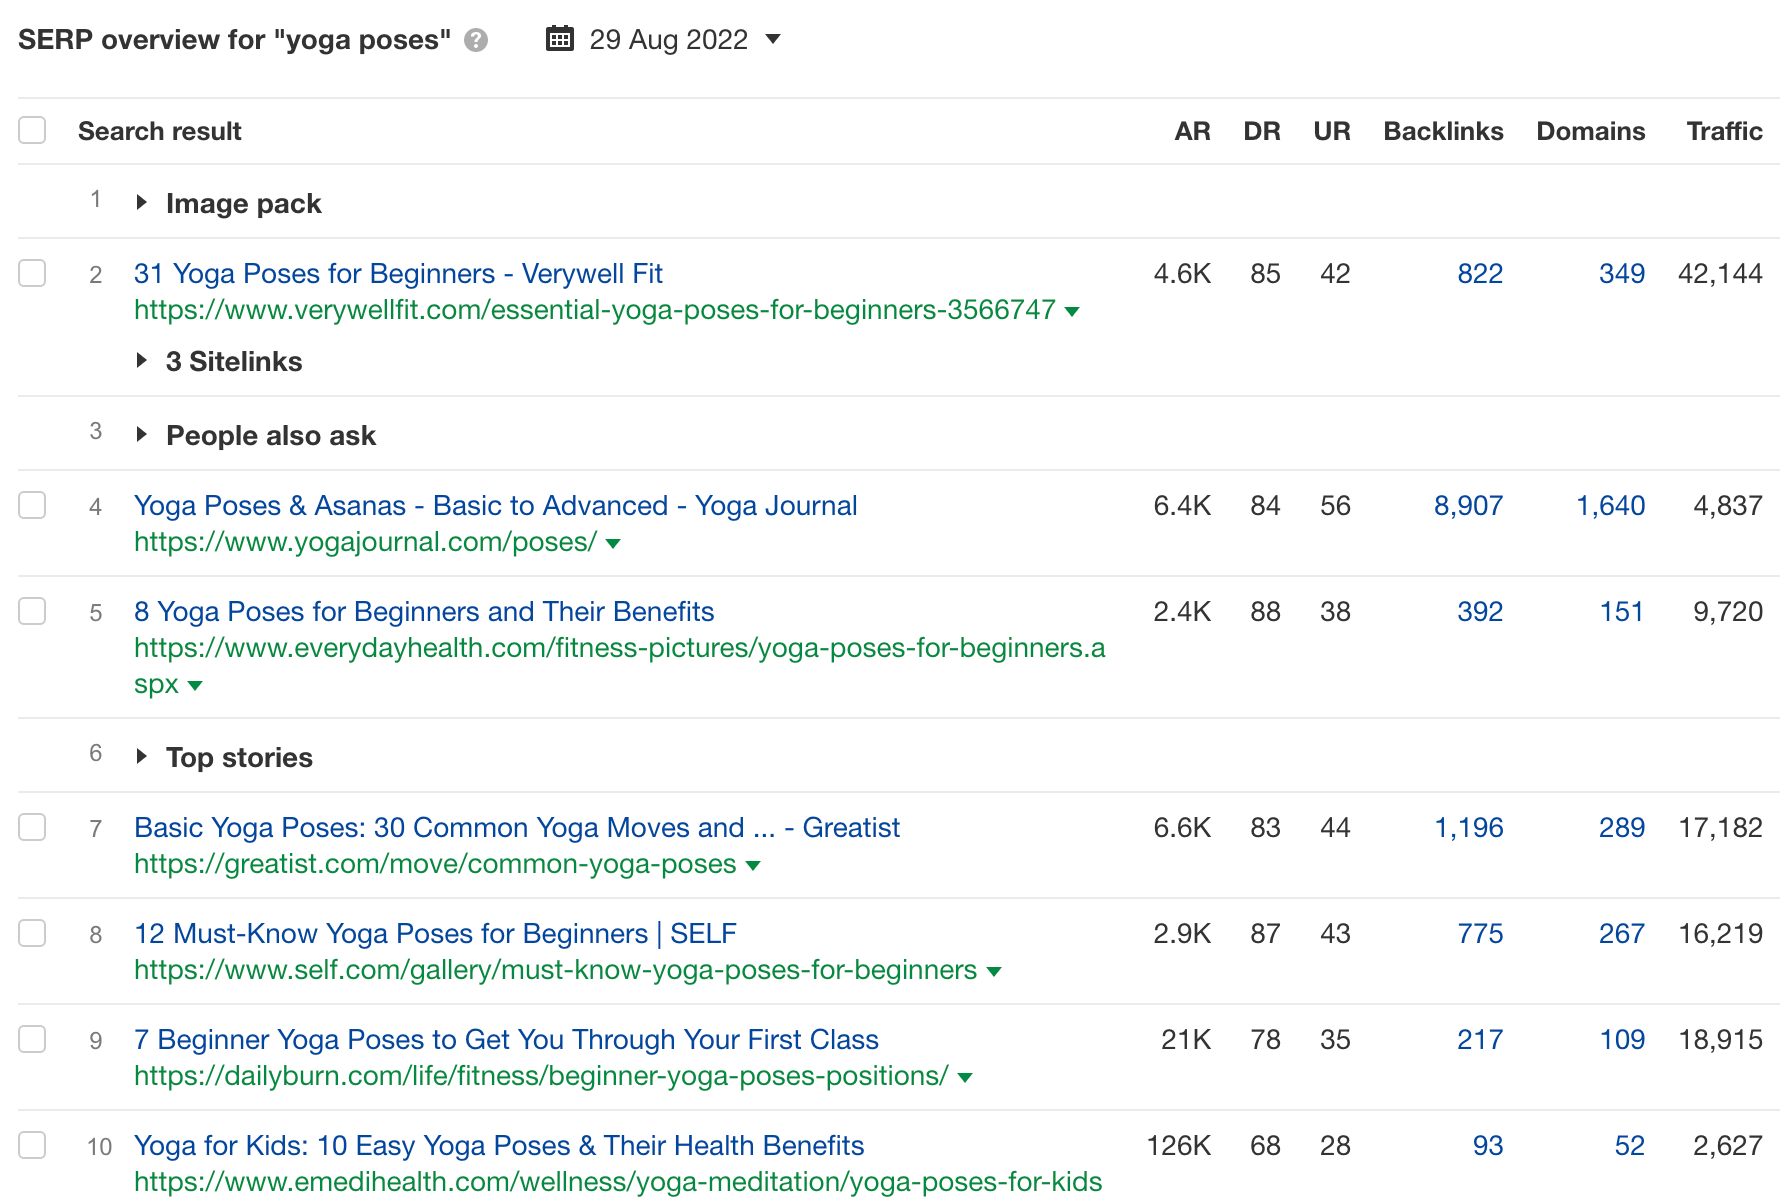 SERP overview for the query "yoga positions," via Ahrefs' keyword explorer